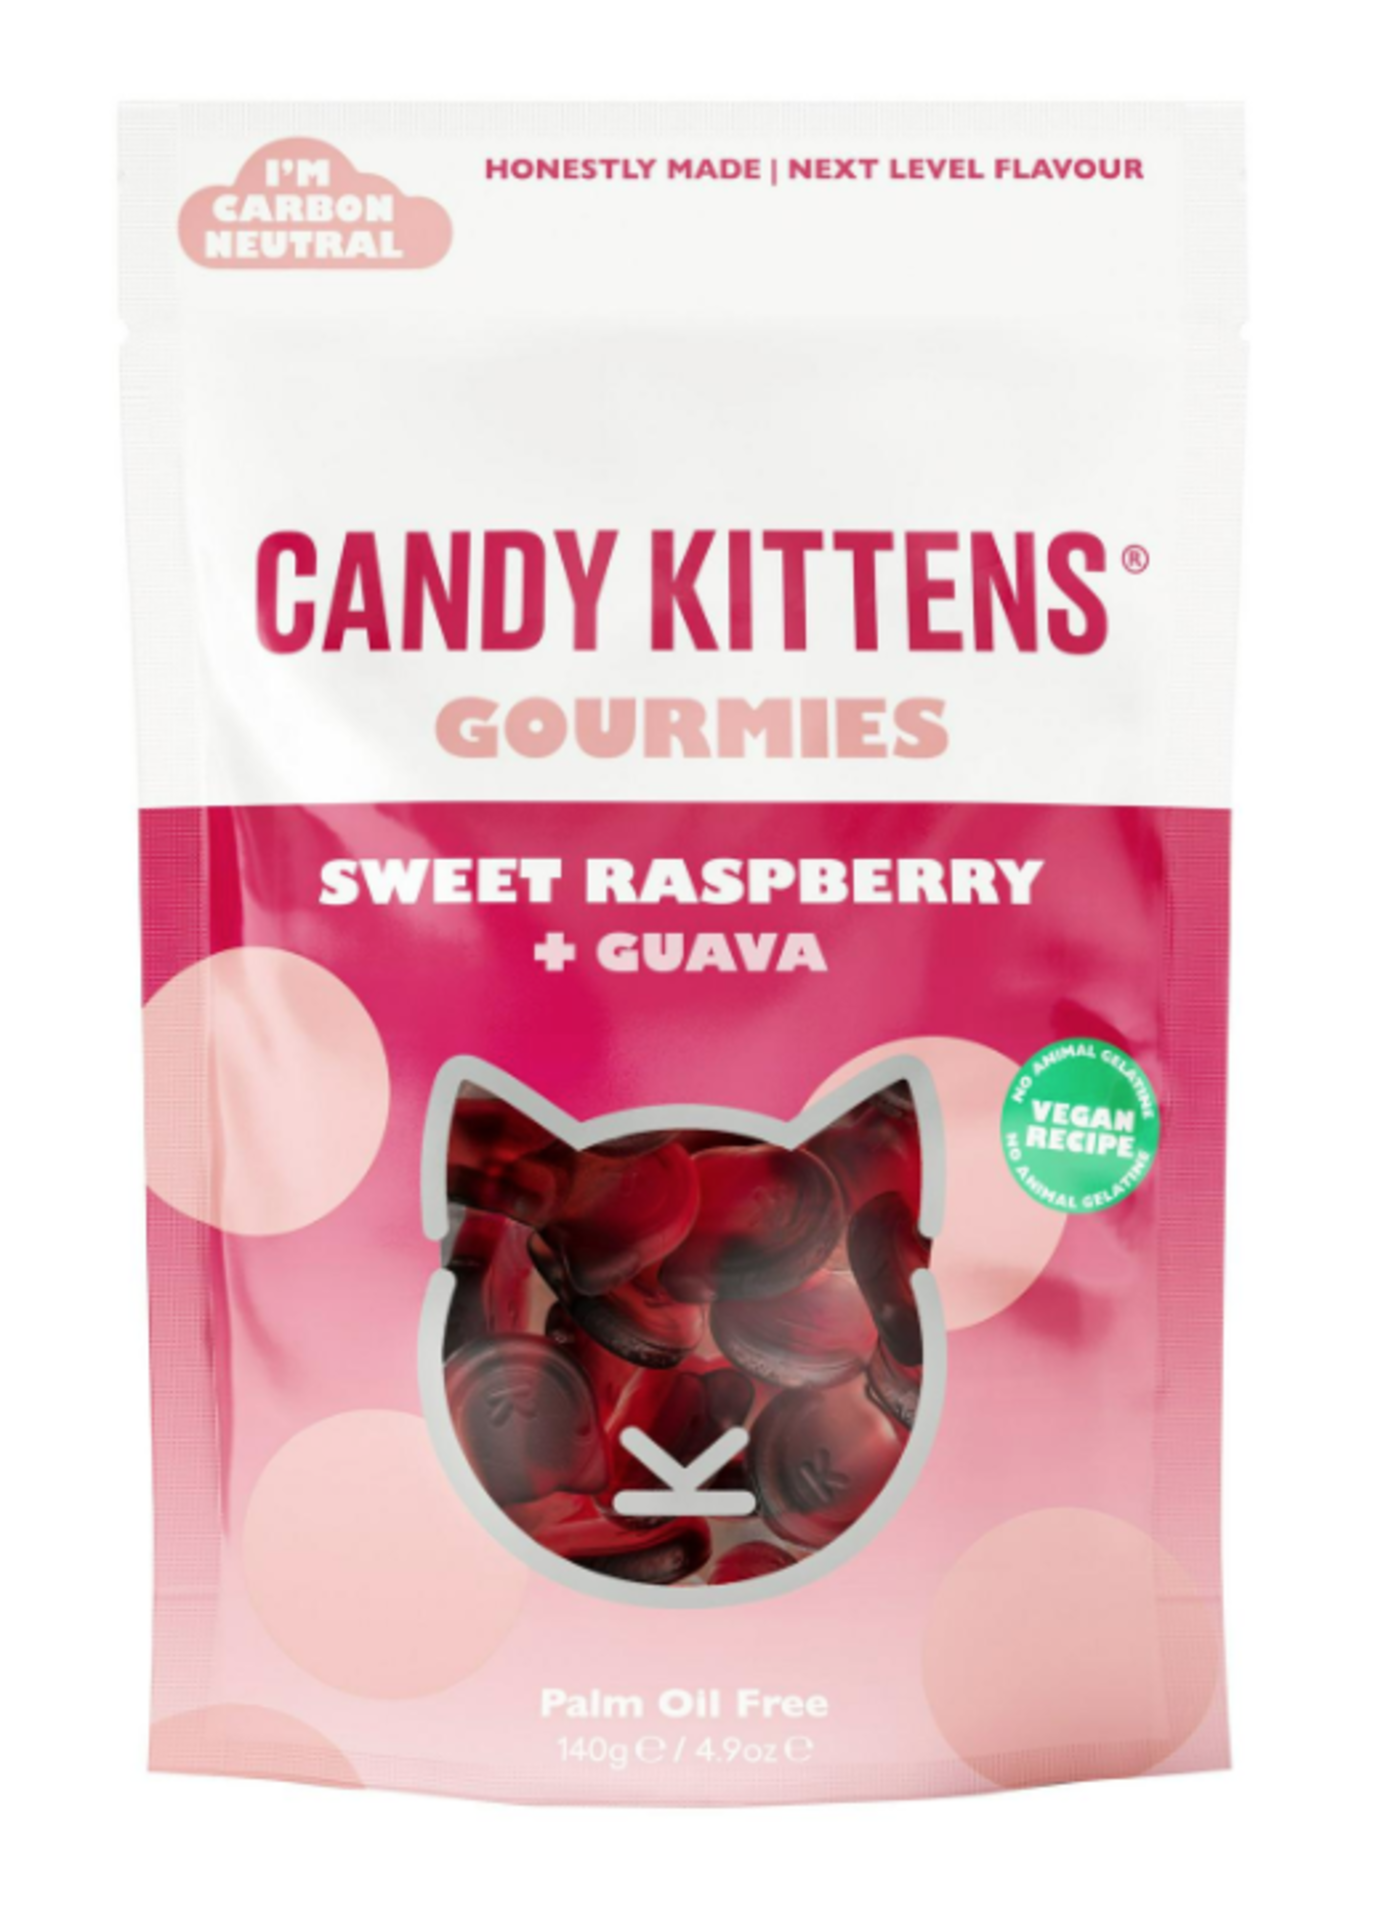 RRP £929 (Approx. Count 138)(F58) 32 x CANDY KITTENS GOURMIES Sweet Raspberry & Guava - 140g Sweet